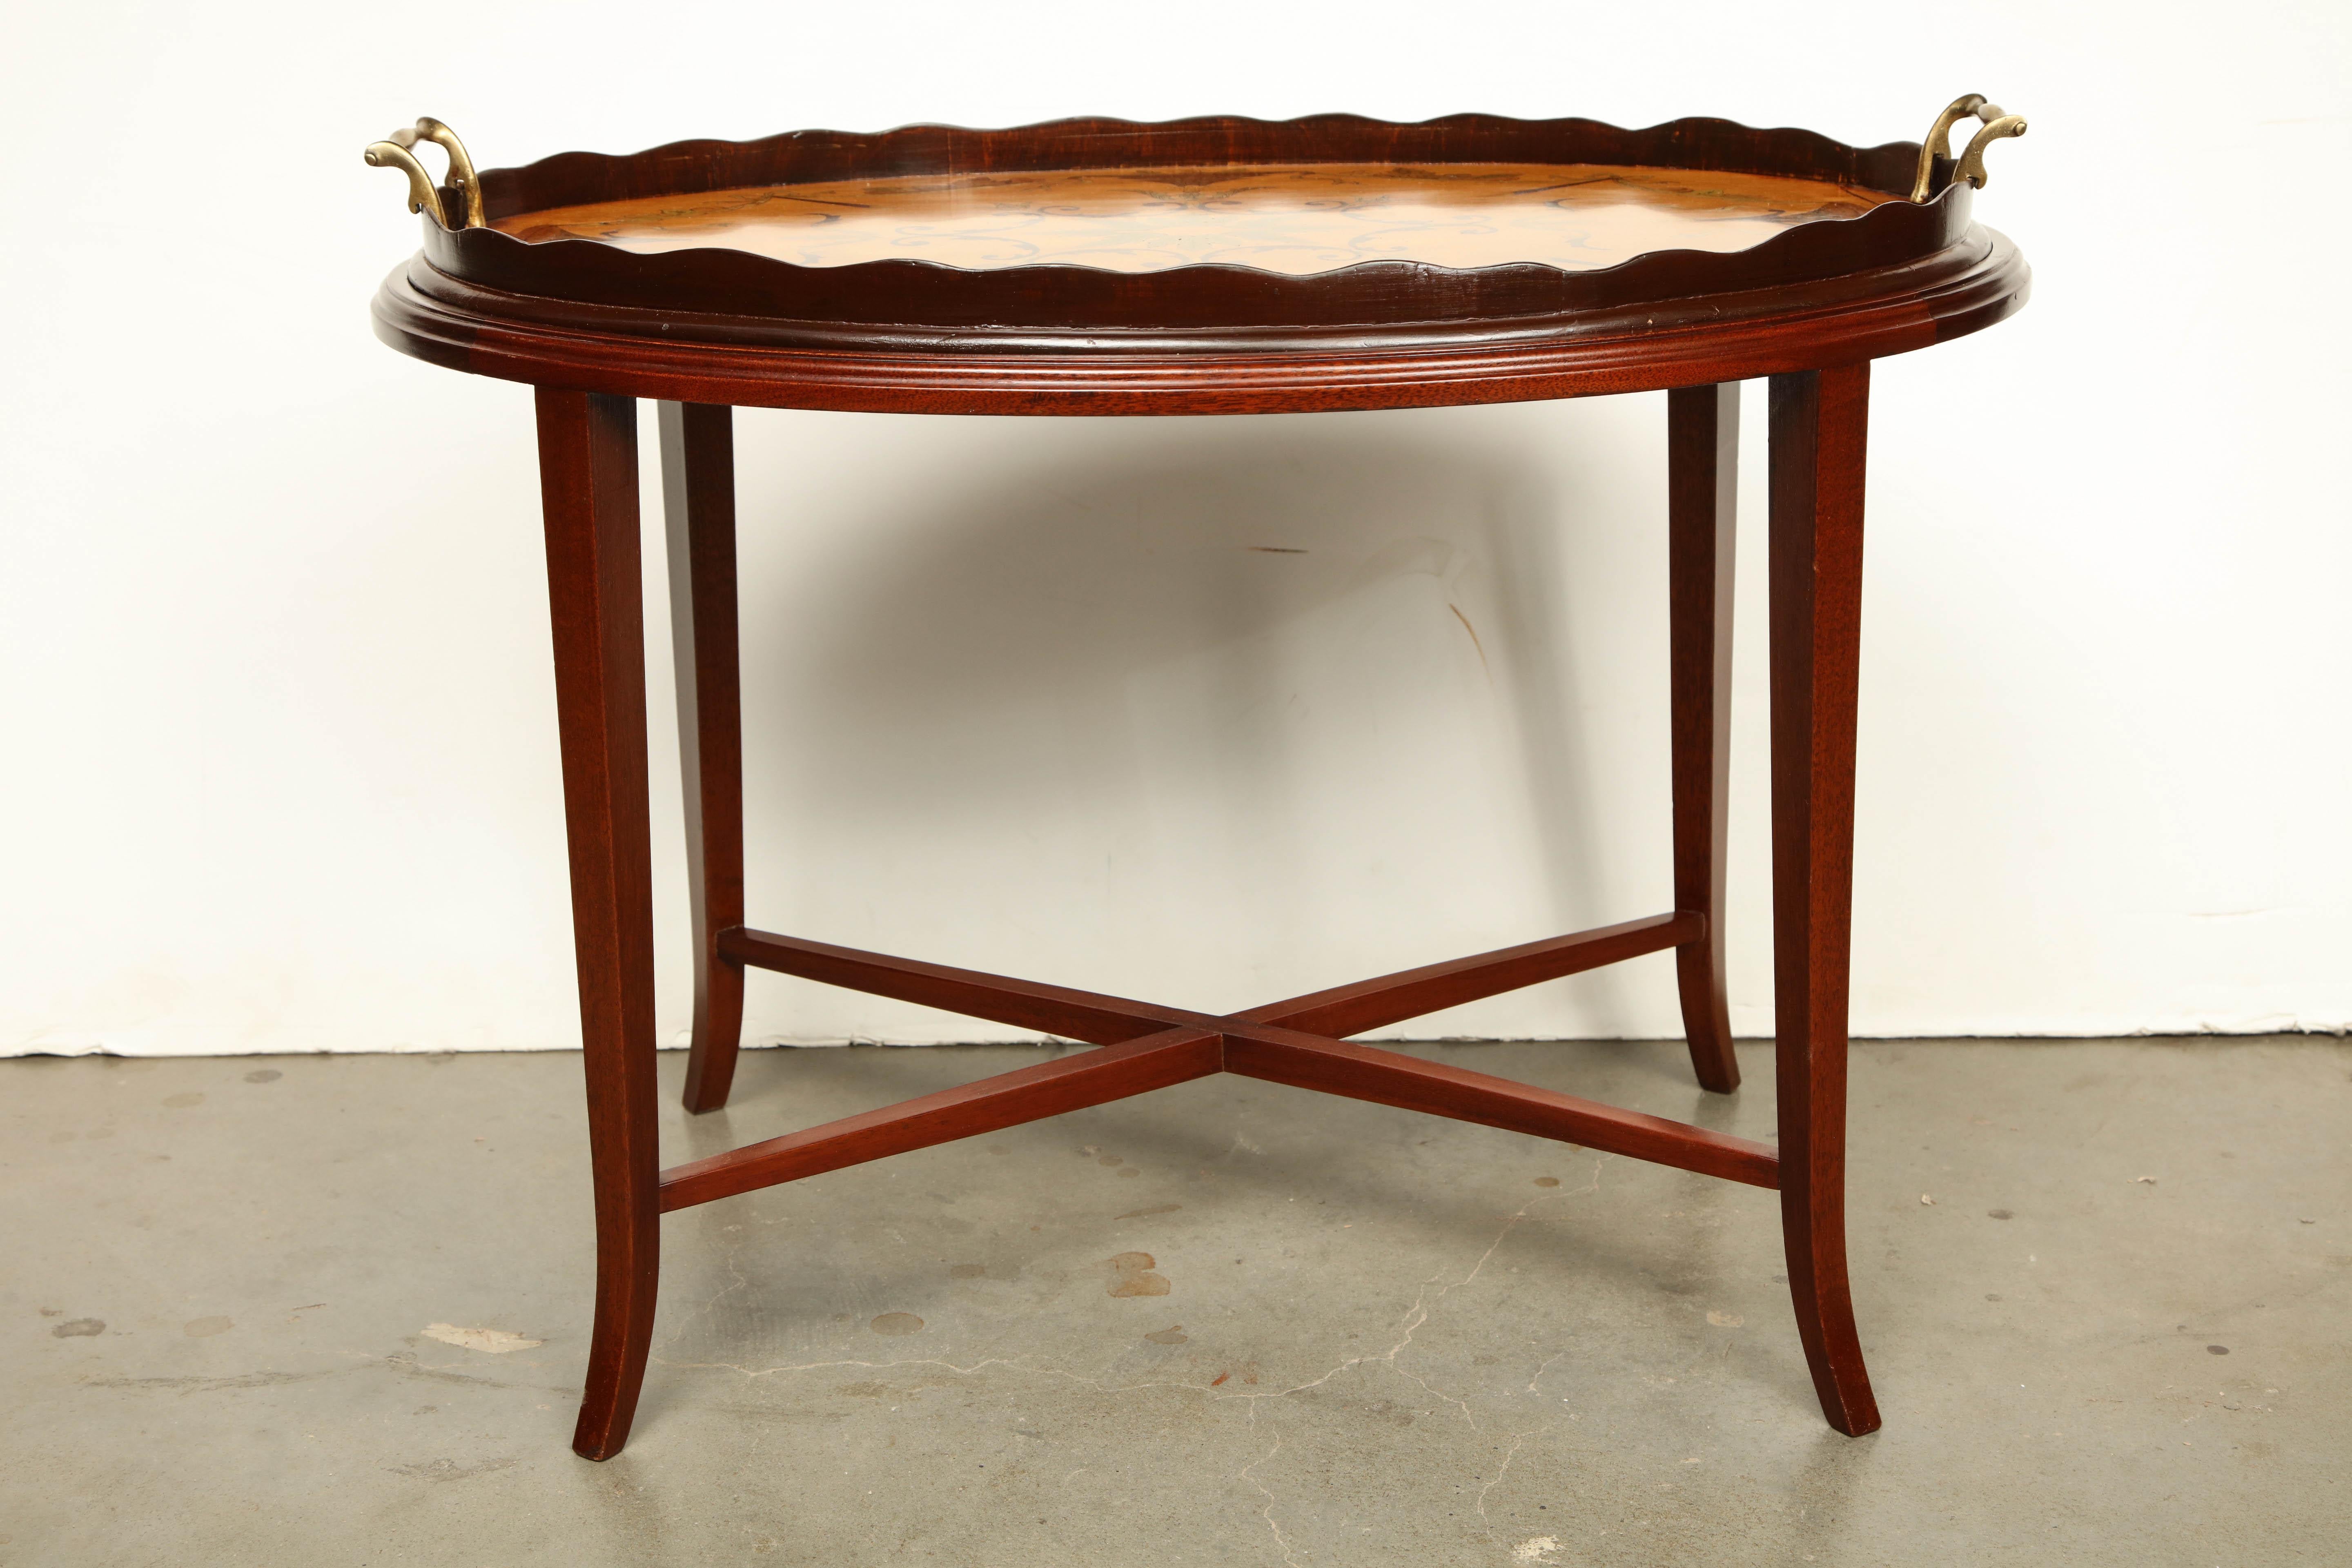 Adam Style English Oval Inlaid Tray on Stand